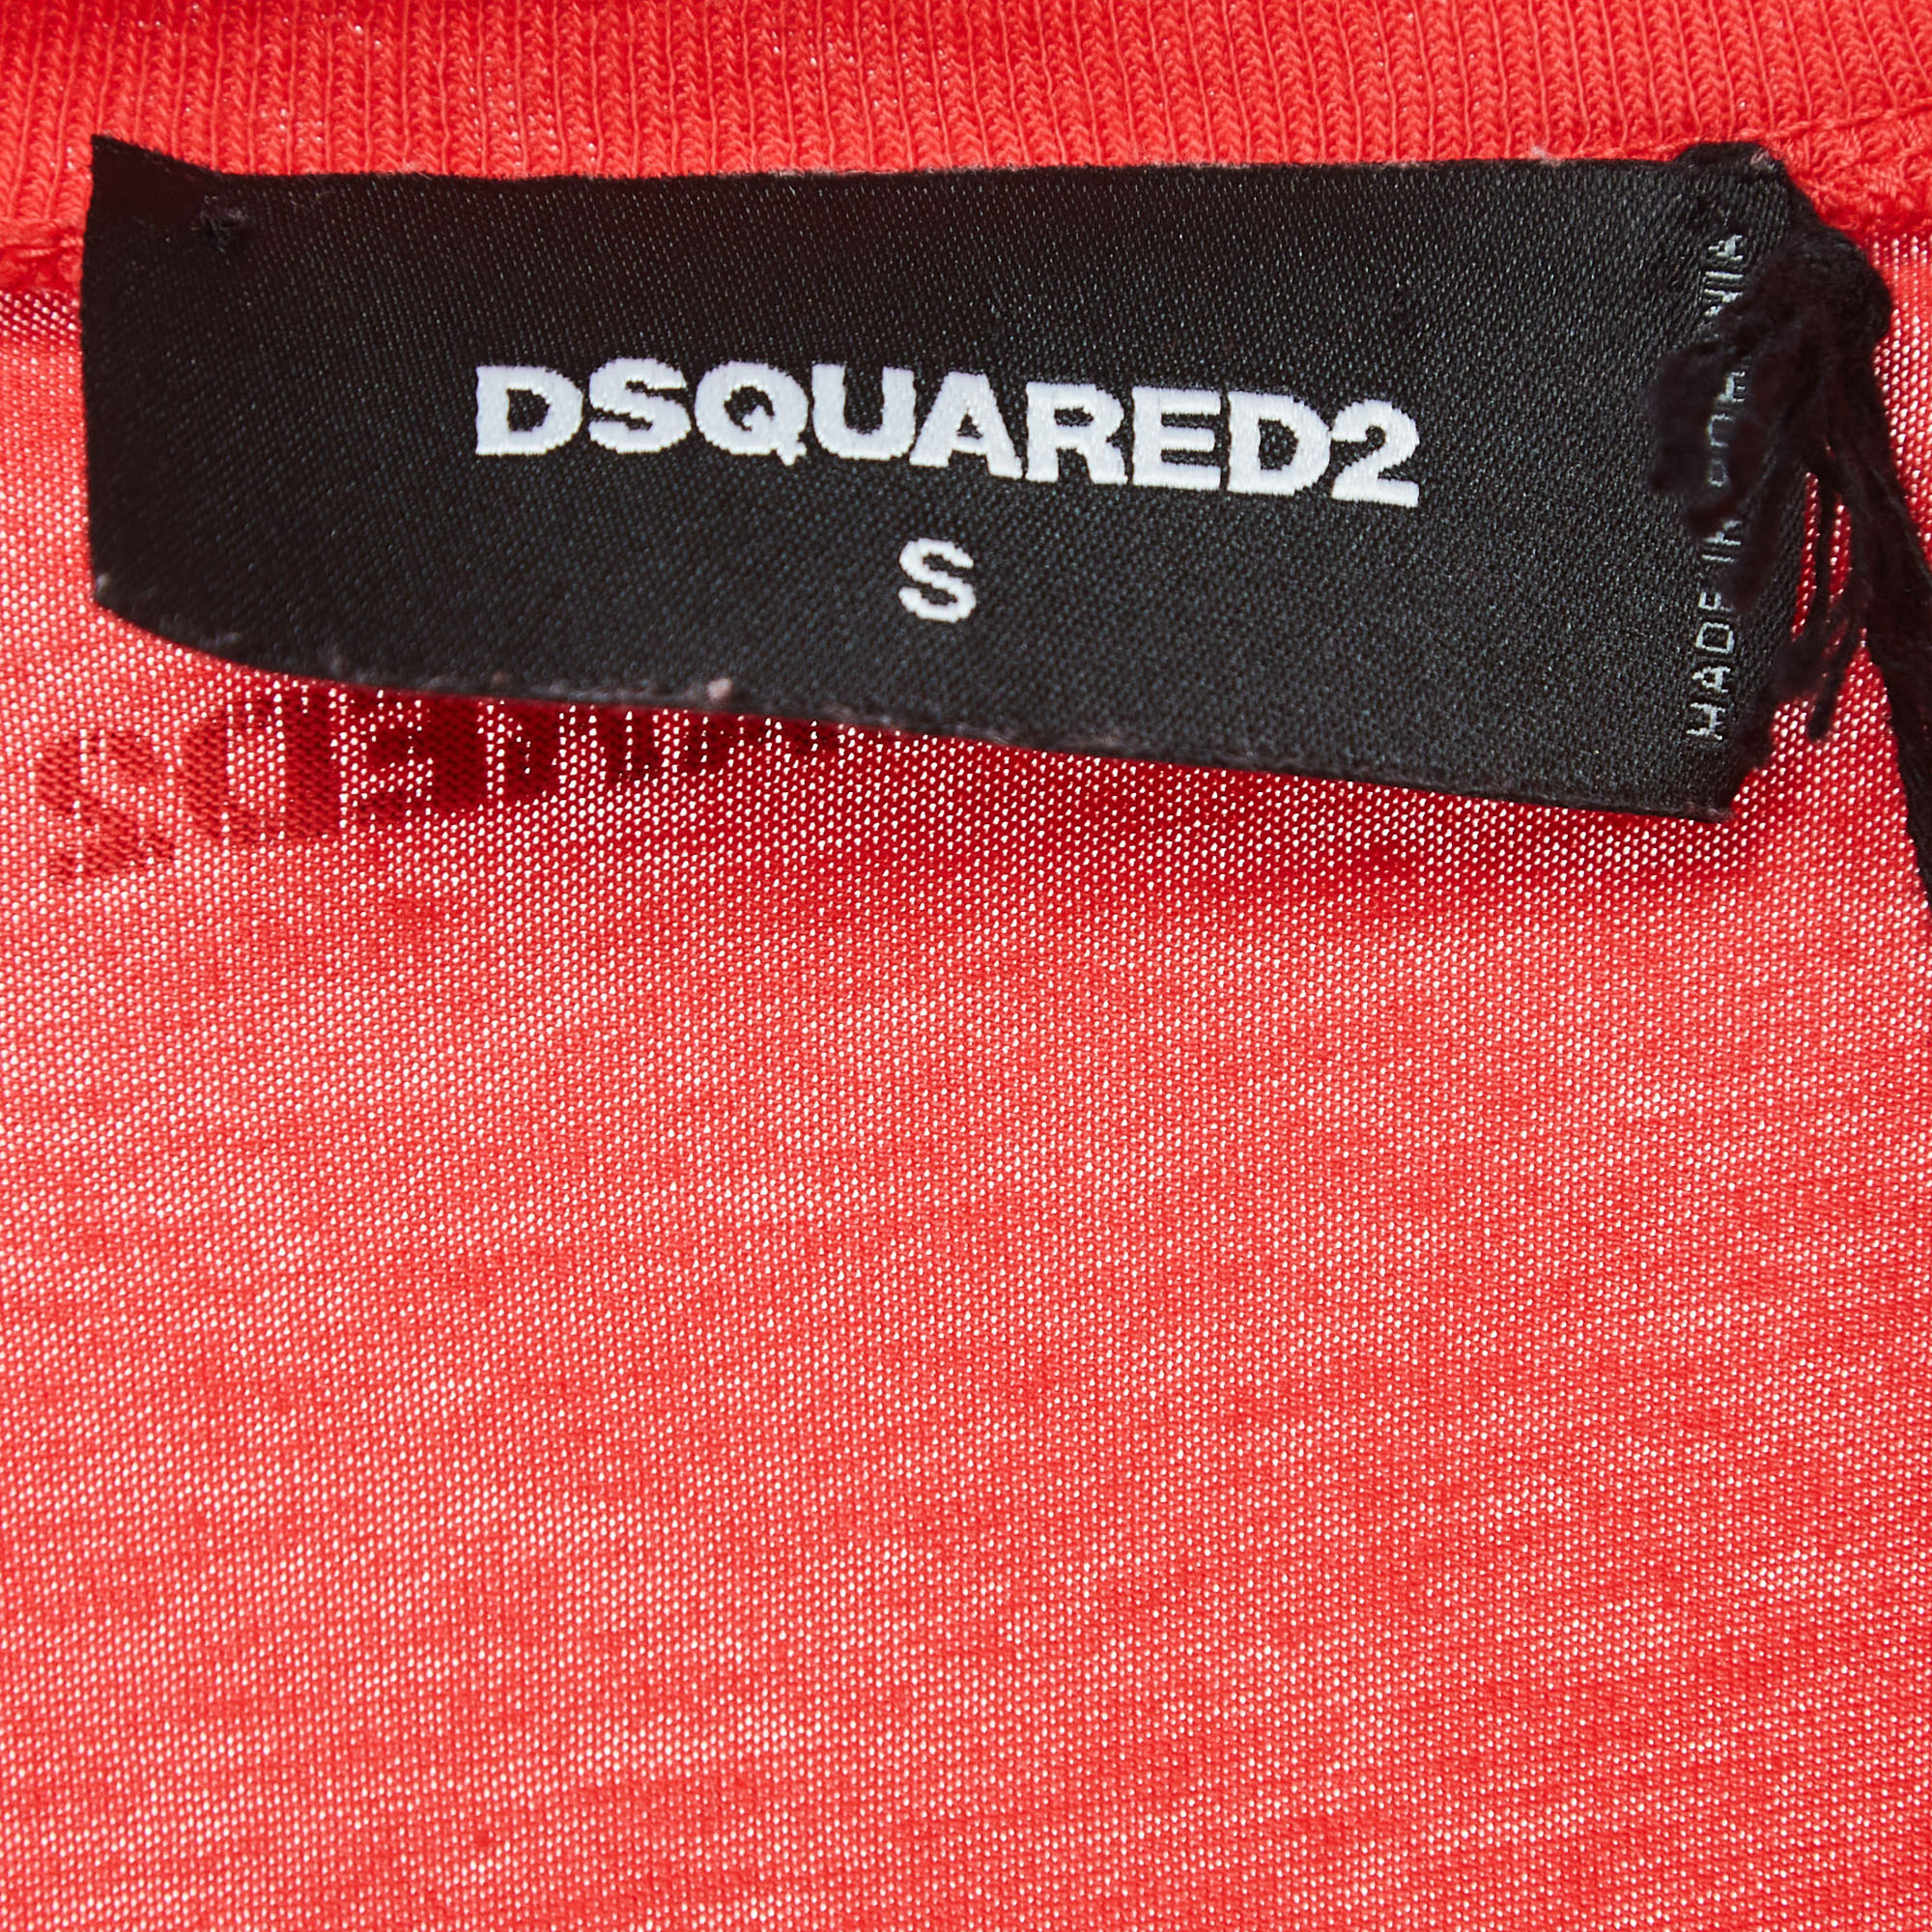 Dsquared2 Red Logo Print Cotton Half Sleeve T-Shirt S